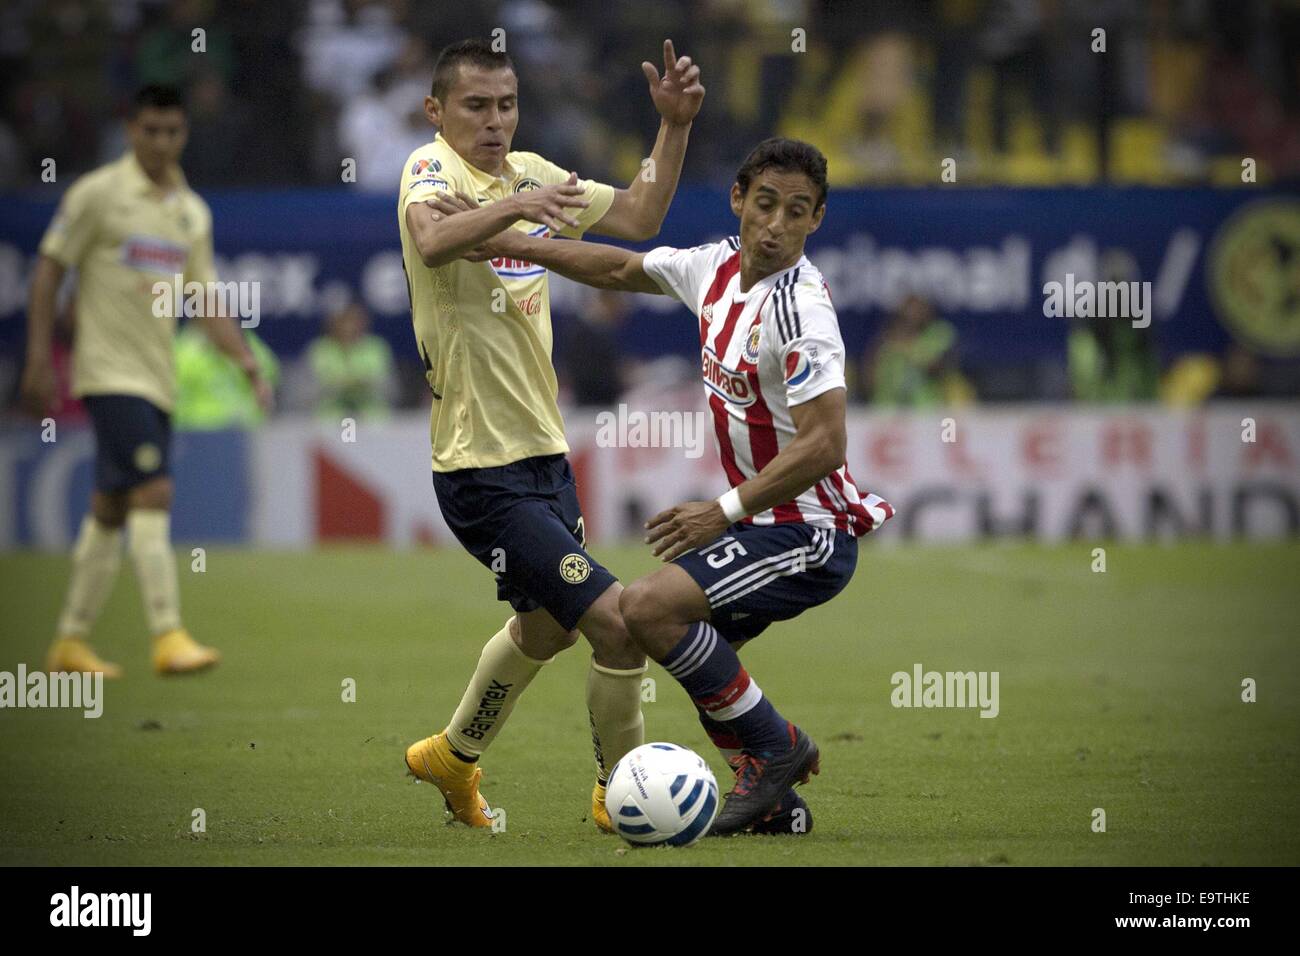 Mexico City, Mexico. 1st Nov, 2014. America's Paul Aguilar (L) vies the ball with Fernando Arce of Chivas during the match of the Day 15 of the Opening Tournament 2014 of the MX League, celebrated in the Azteca Stadium, in Mexico City, capital of Mexico, on Nov. 1, 2014. Credit:  Alejandro Ayala/Xinhua/Alamy Live News Stock Photo